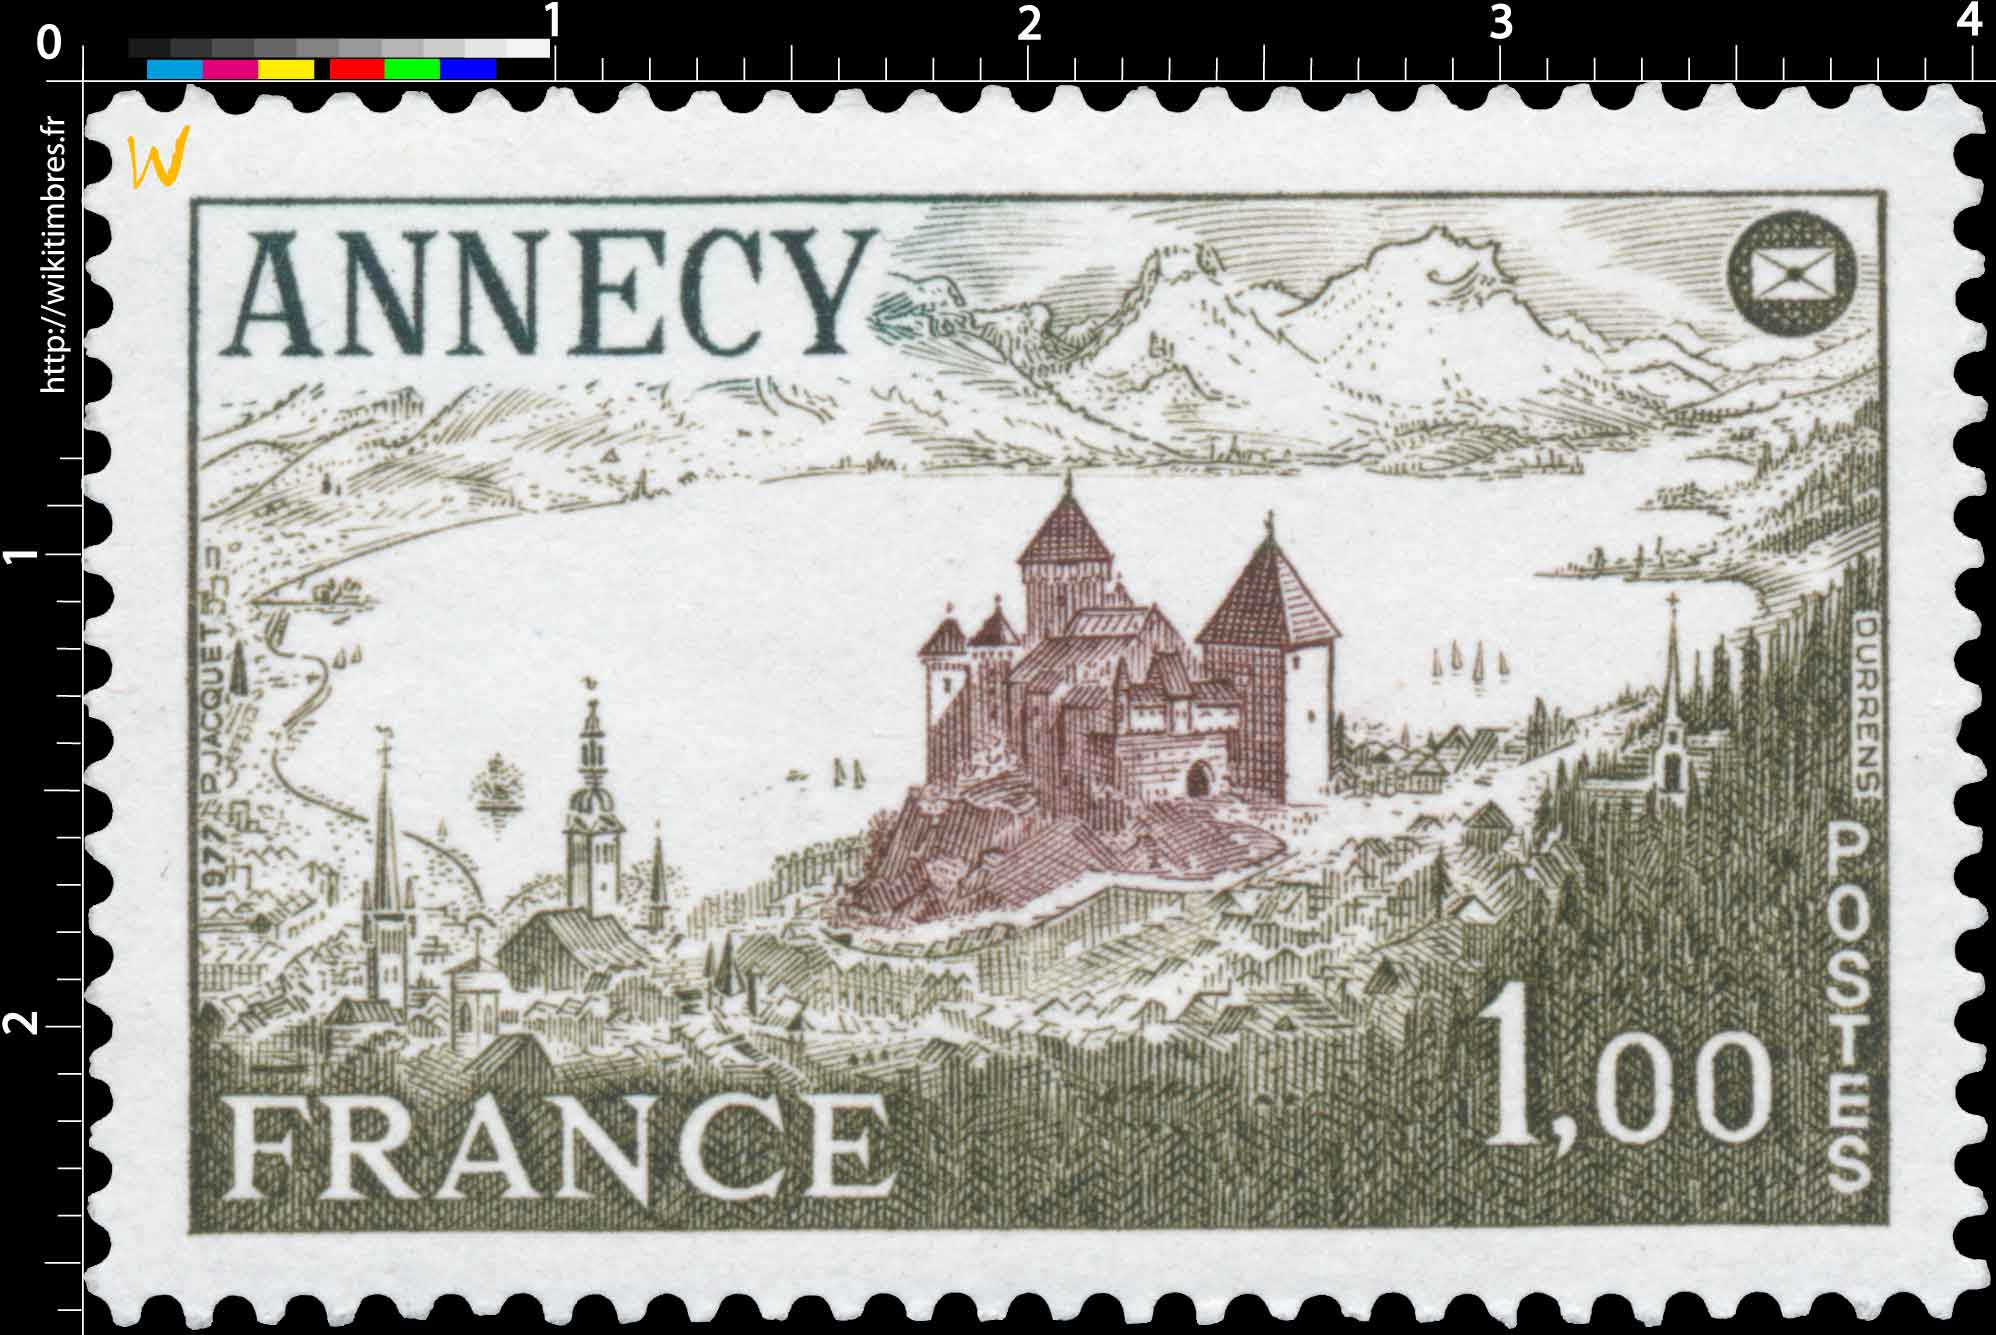 1977 ANNECY